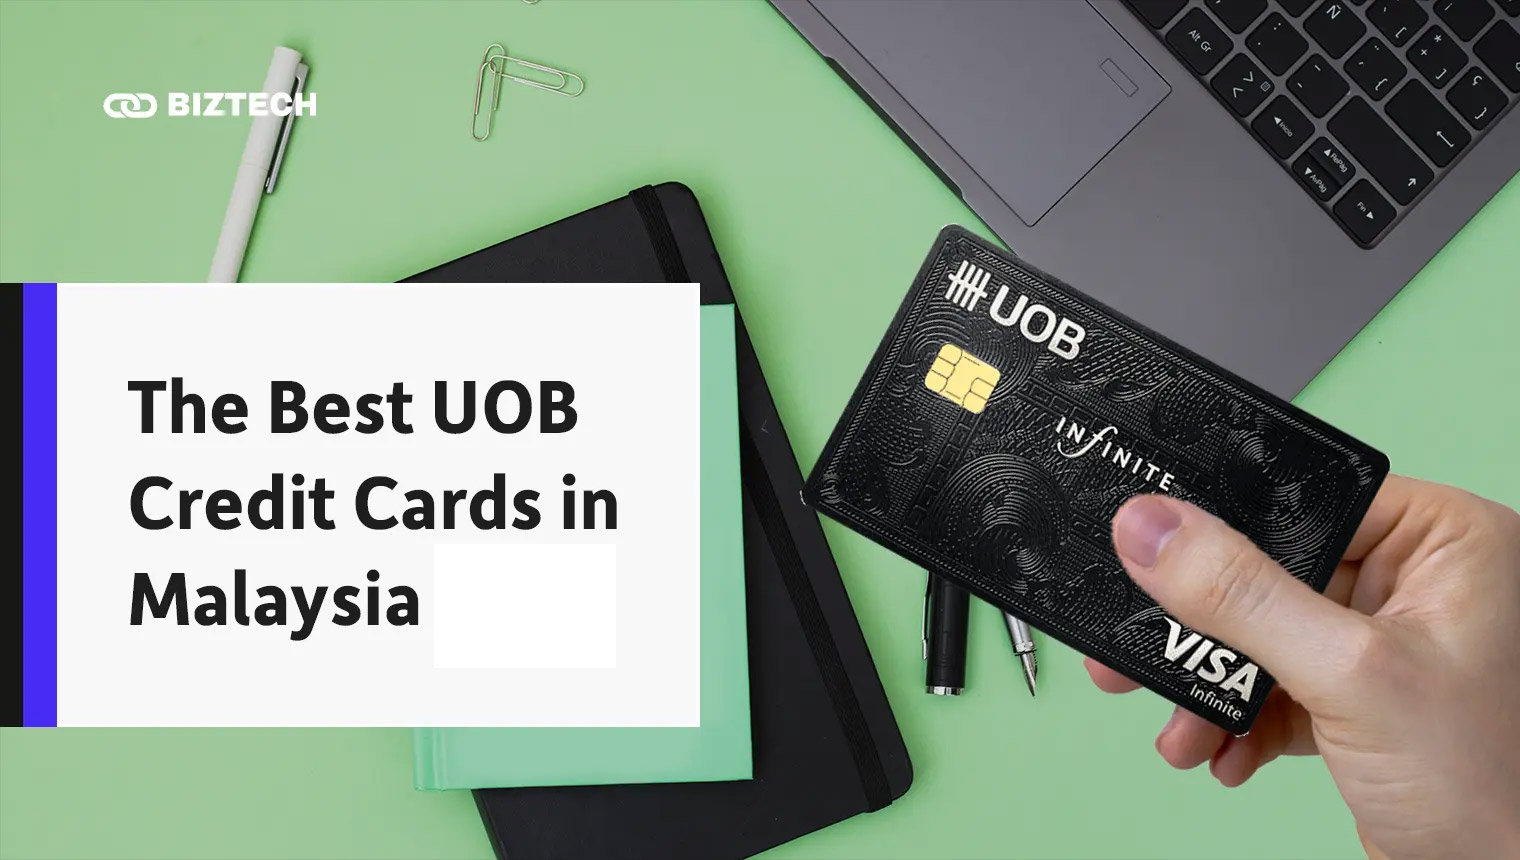 The Best UOB Credit Cards in Malaysia